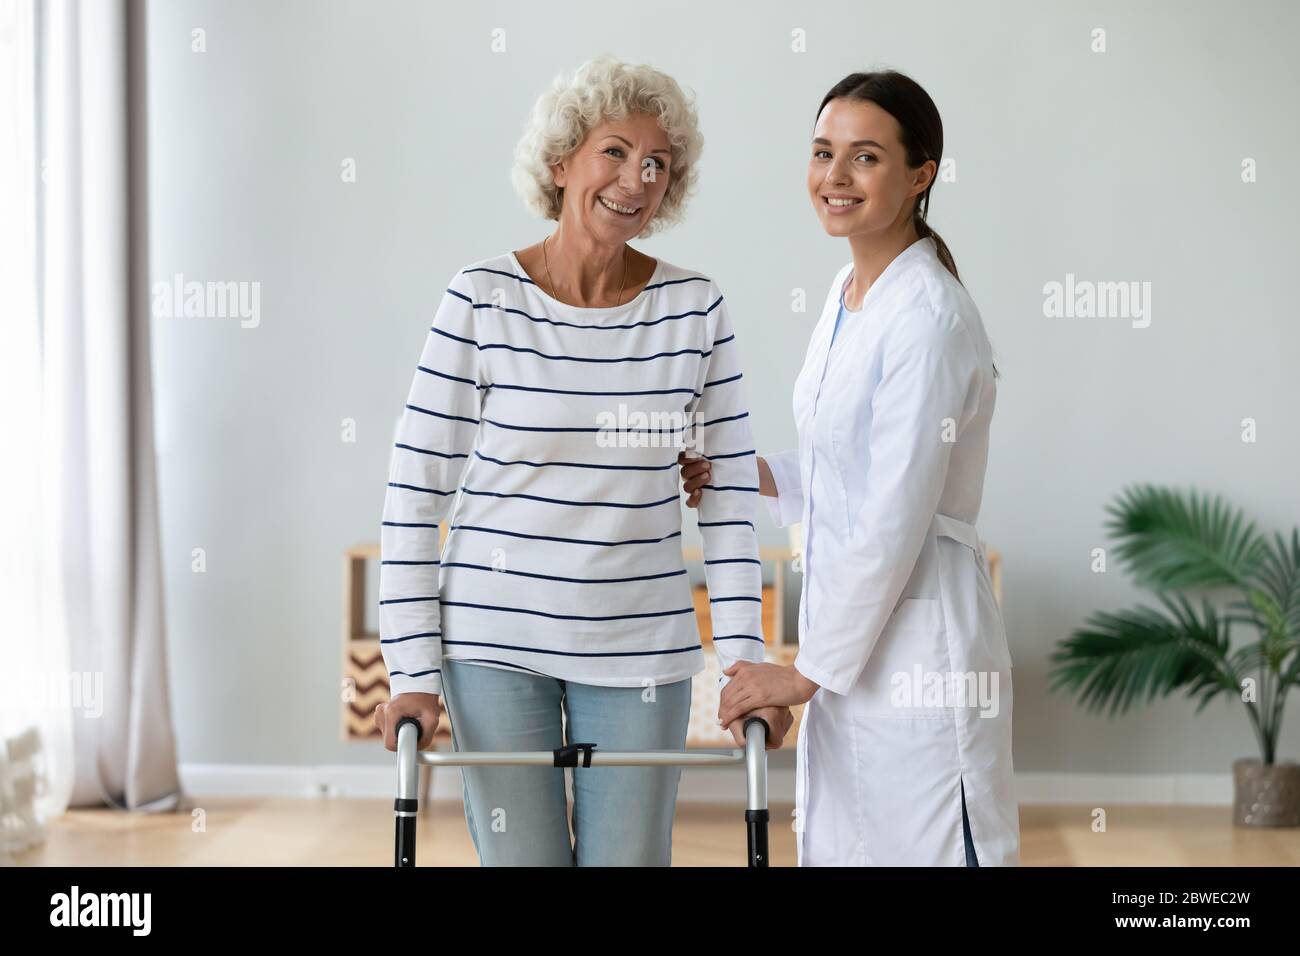 Elderly woman holding rollator feels satisfied after therapy with physiotherapist Stock Photo